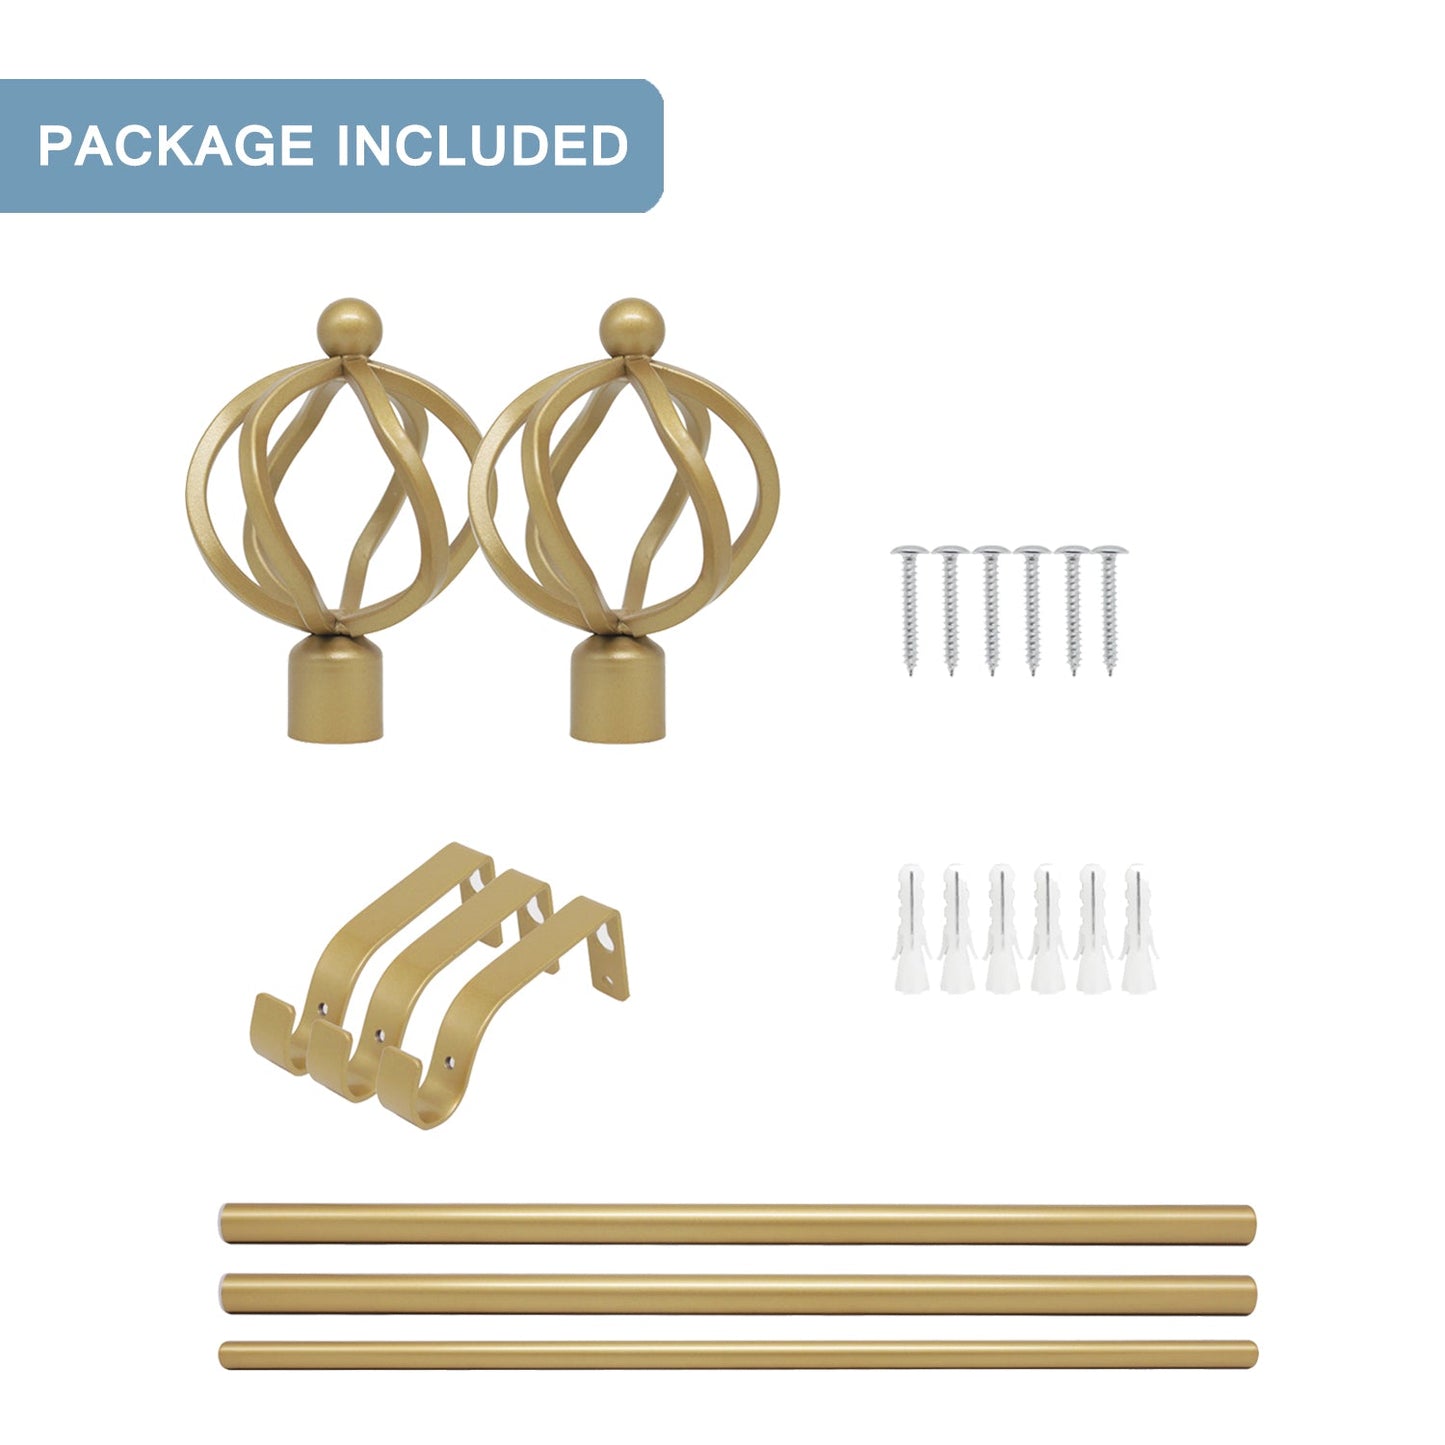 1 Inch Golden Curtain Rod Set Diameter with Twisted Cage Finials, 22-42 Inch